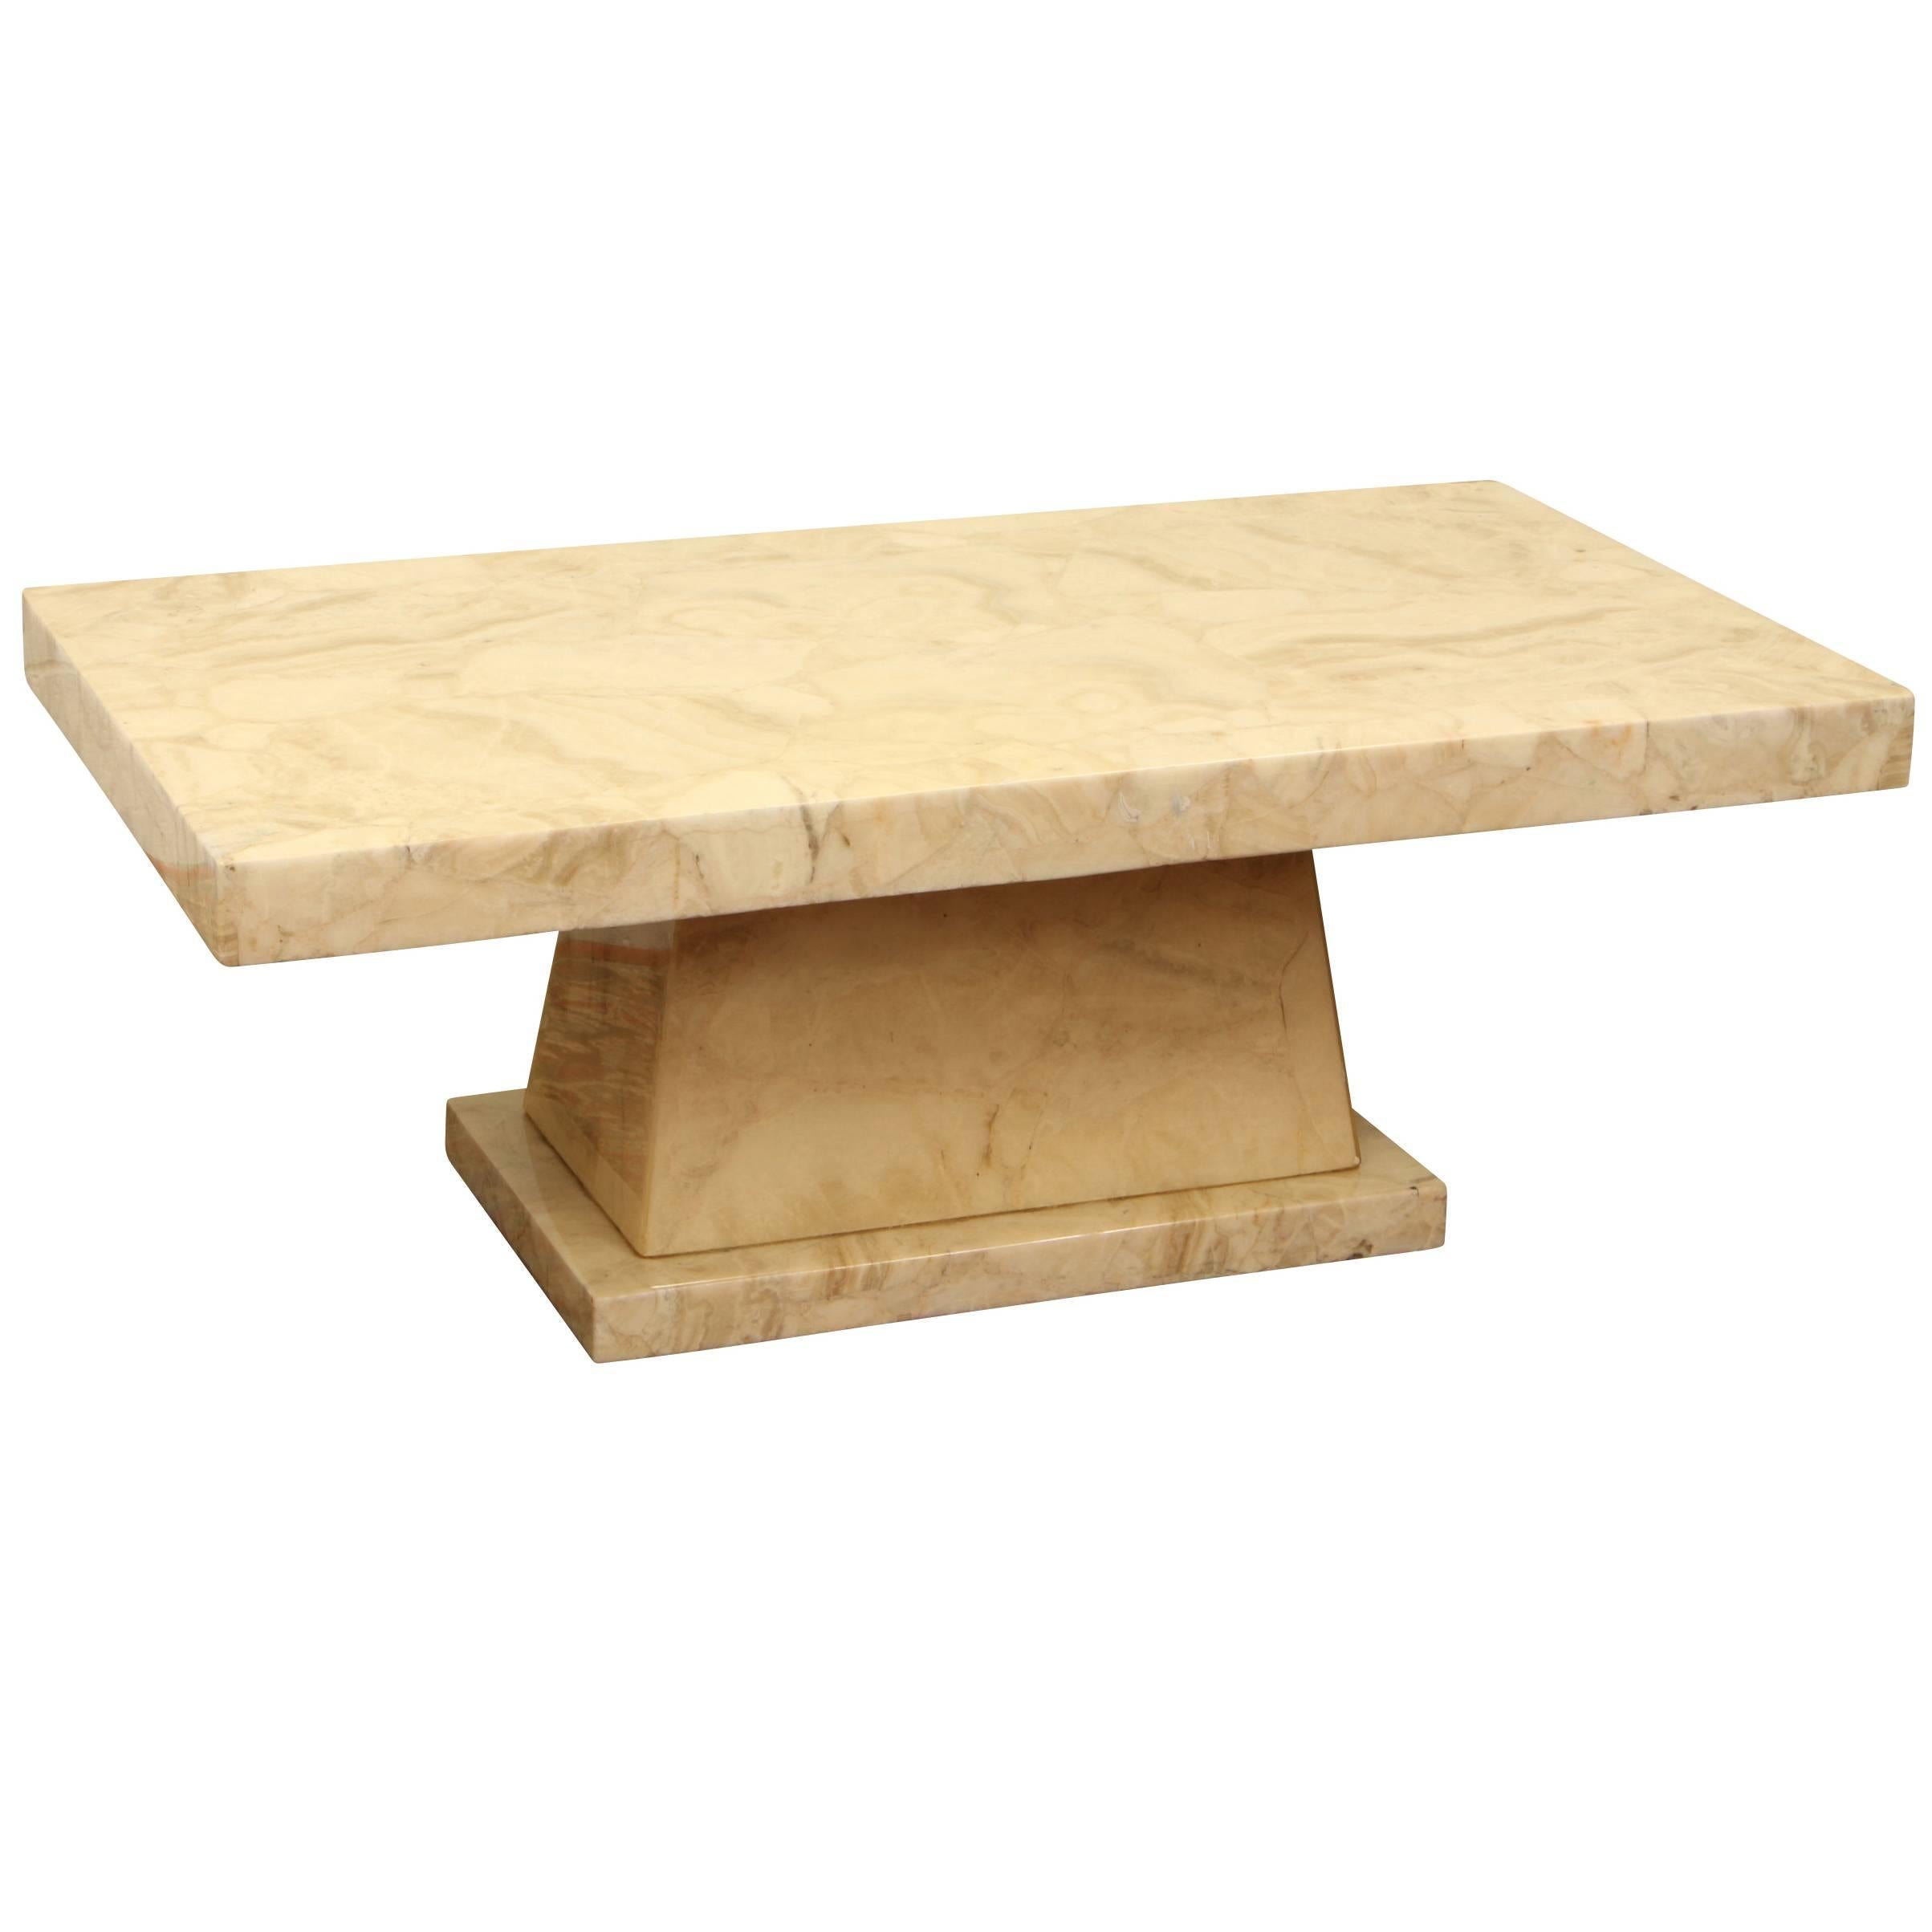 Muller of Mexico Rectangular Onyx Table